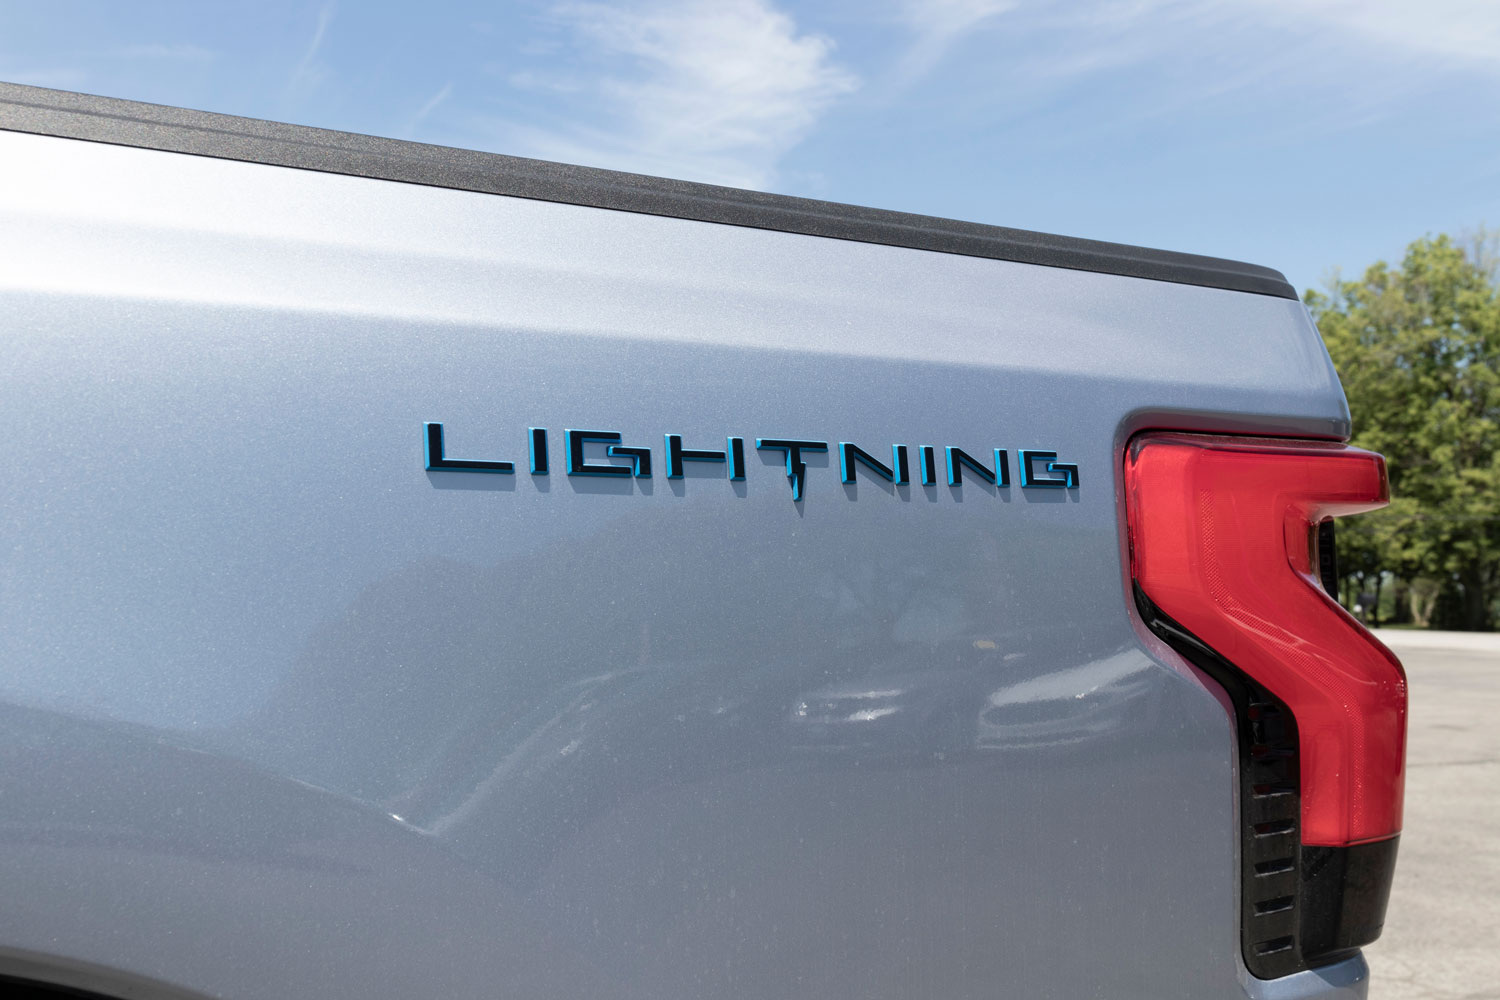 Ford F-150 Lightning display. Ford offers the F150 Lightning all-electric truck in Pro, XLT, Lariat, and Platinum models.